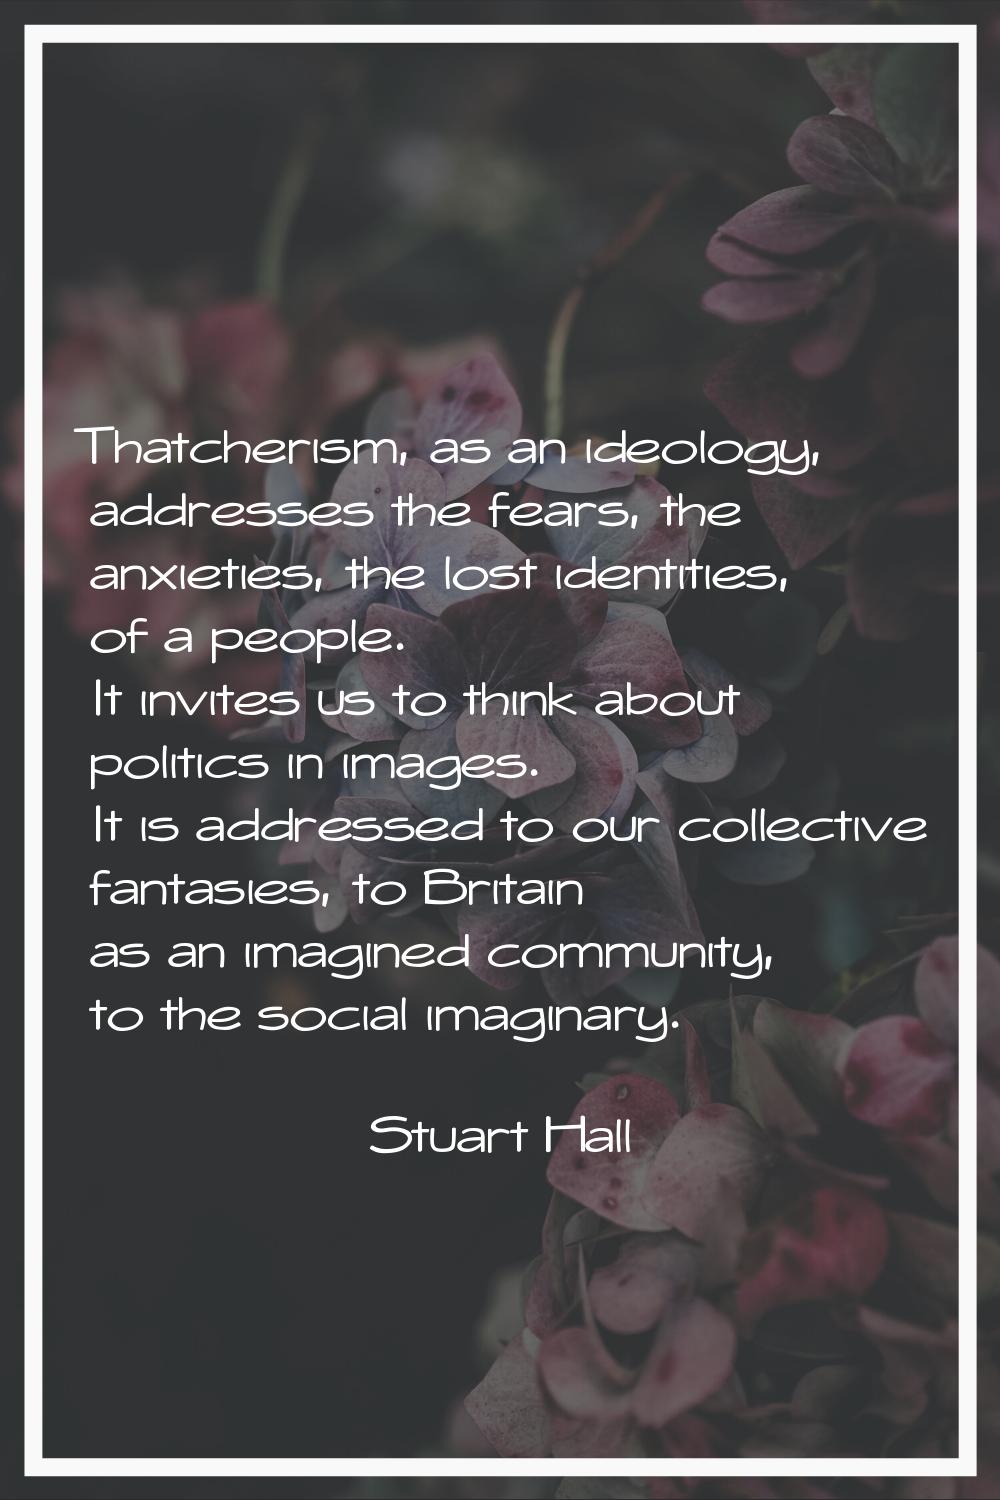 Thatcherism, as an ideology, addresses the fears, the anxieties, the lost identities, of a people. 